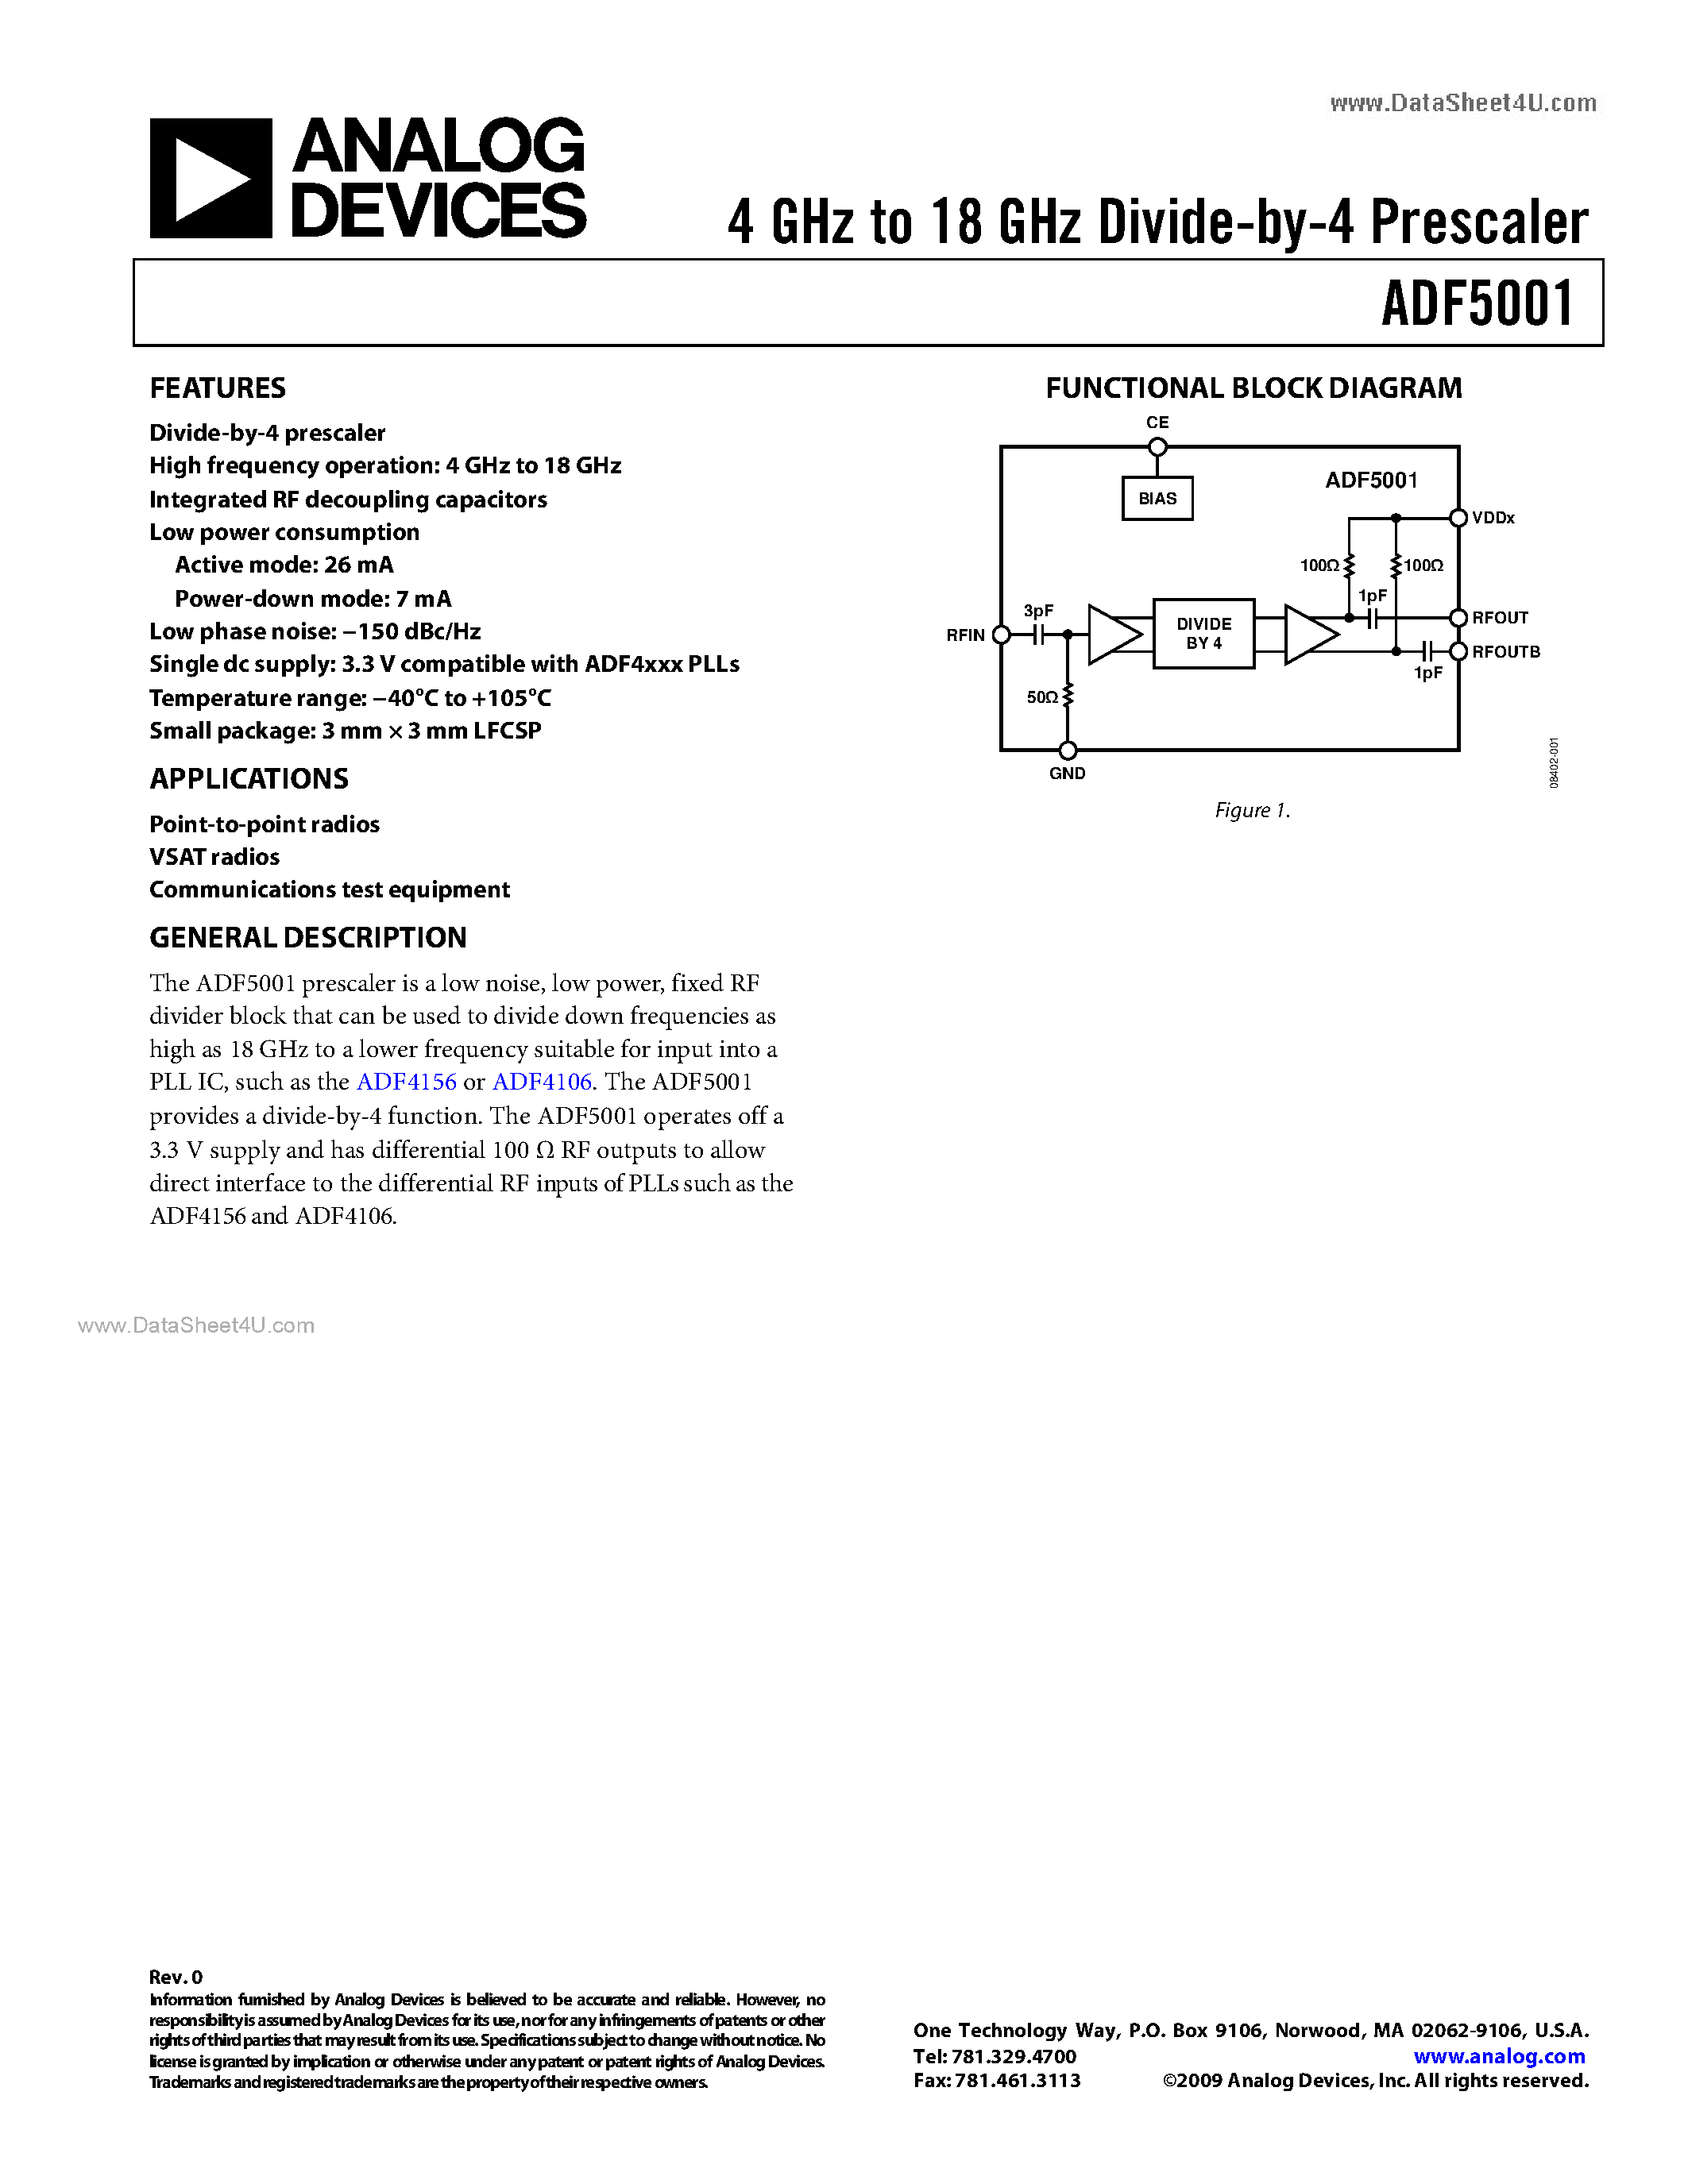 Datasheet ADF5001 - 4 GHz to 18 GHz Divide-by-4 Prescaler page 1